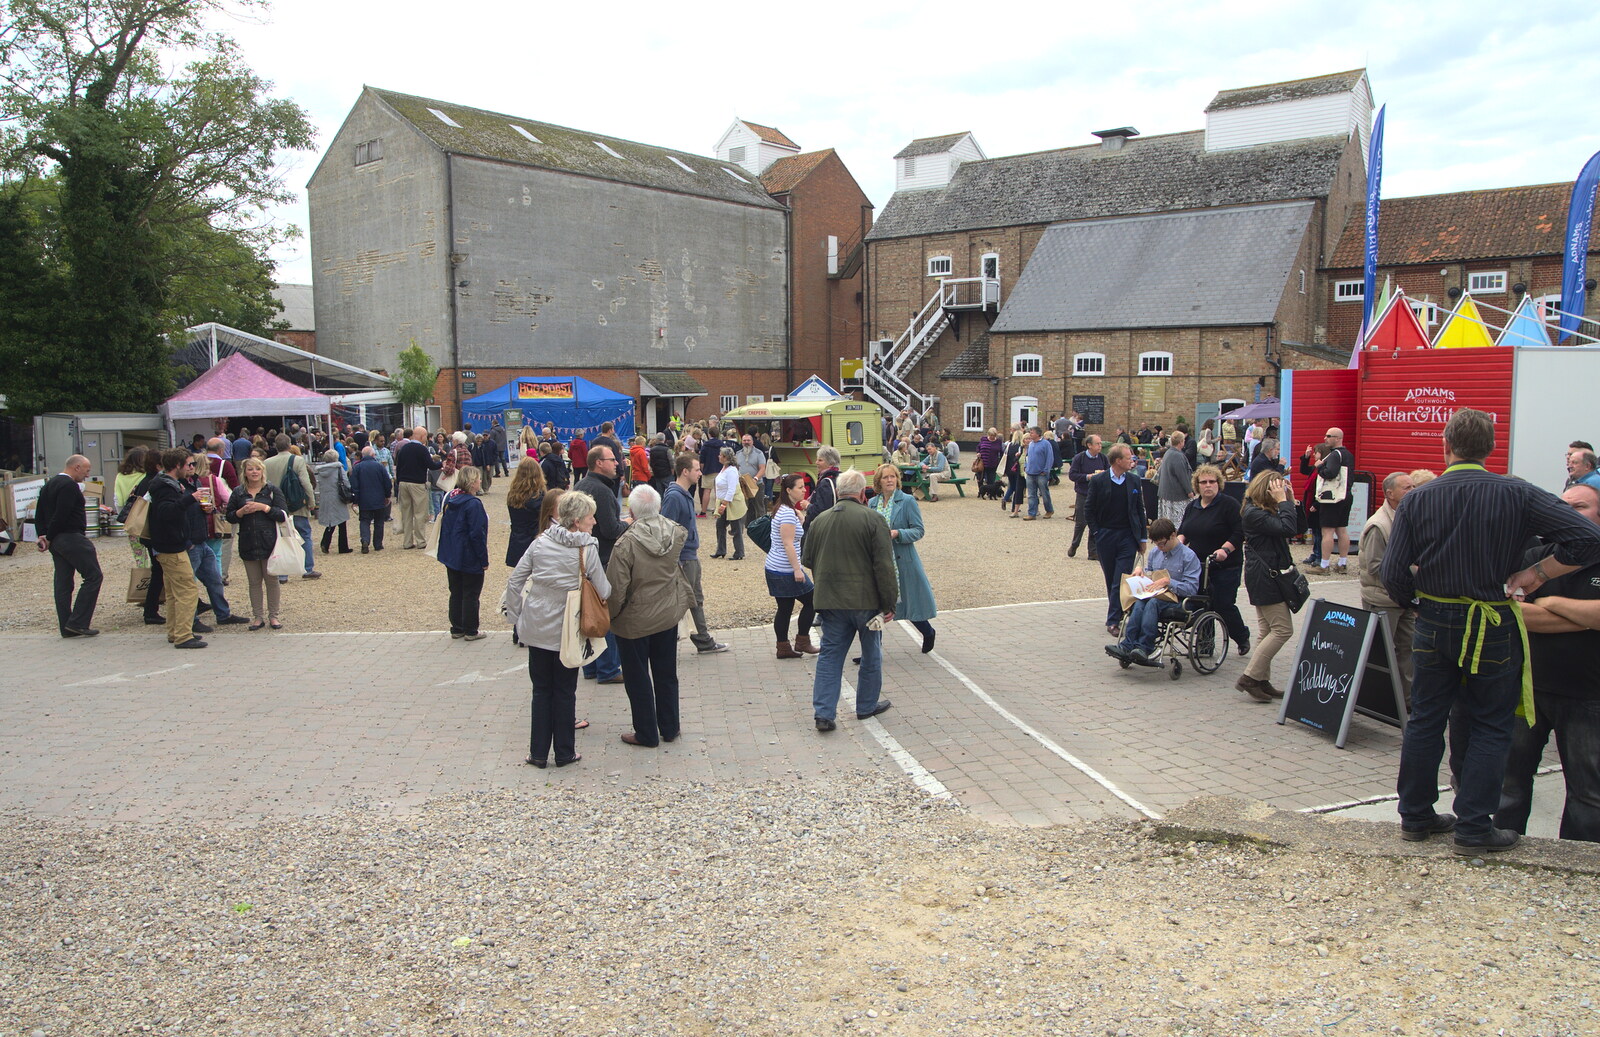 Round the back of the maltings from The Aldeburgh Food Festival, Aldeburgh, Suffolk - 30th September 2012